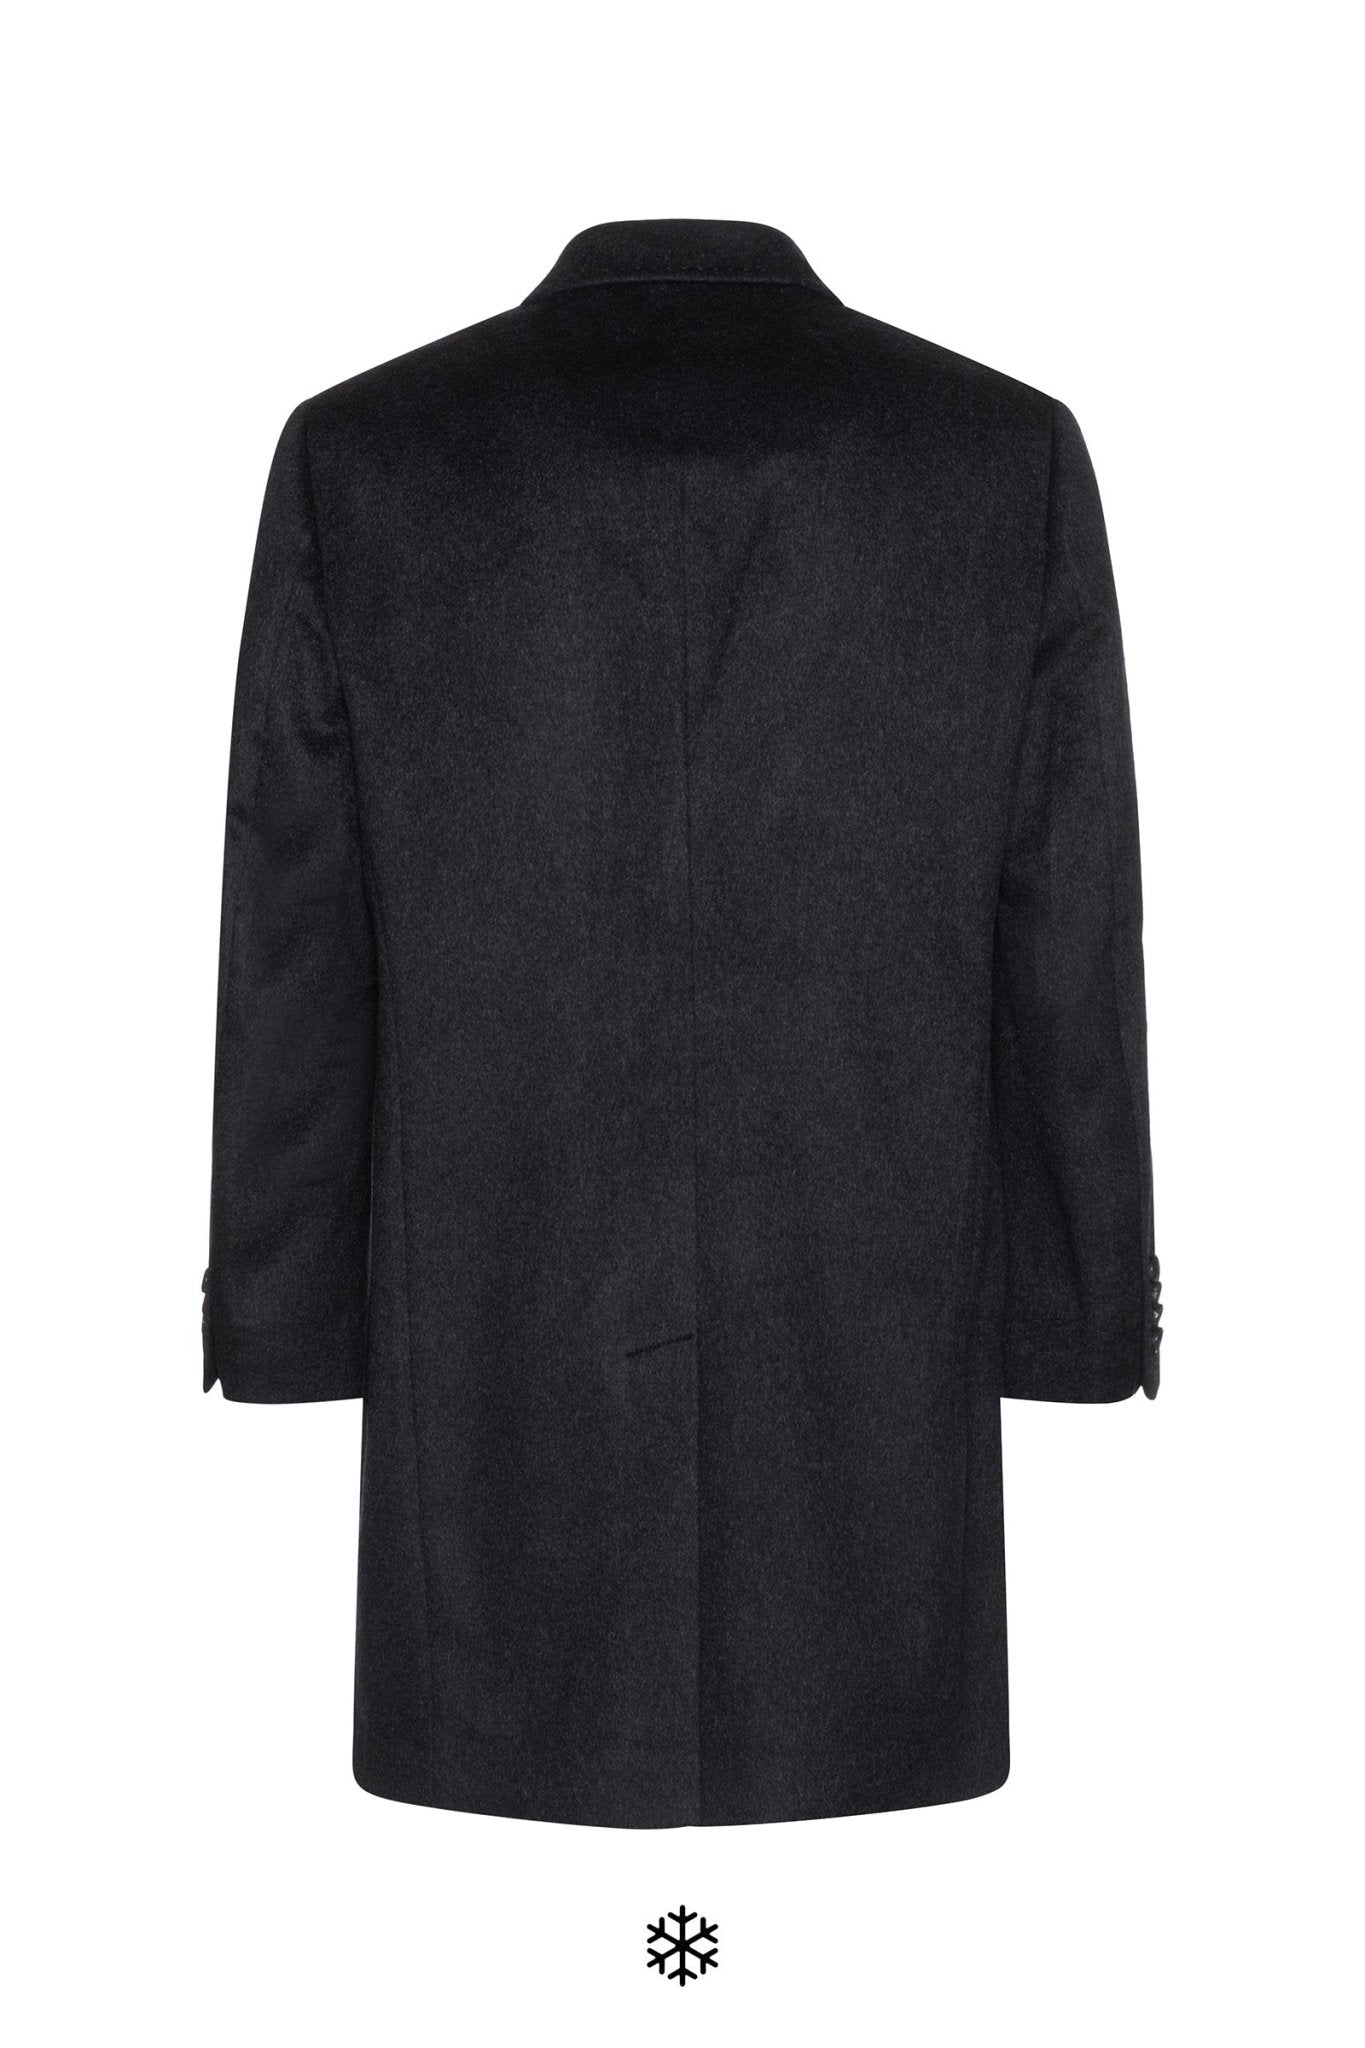 ST-PIERRE CHARCOAL CASHMERE OVERCOAT - Cardinal of Canada-US-ST-PIERRE Charcoal CASHMERE TOPCOAT